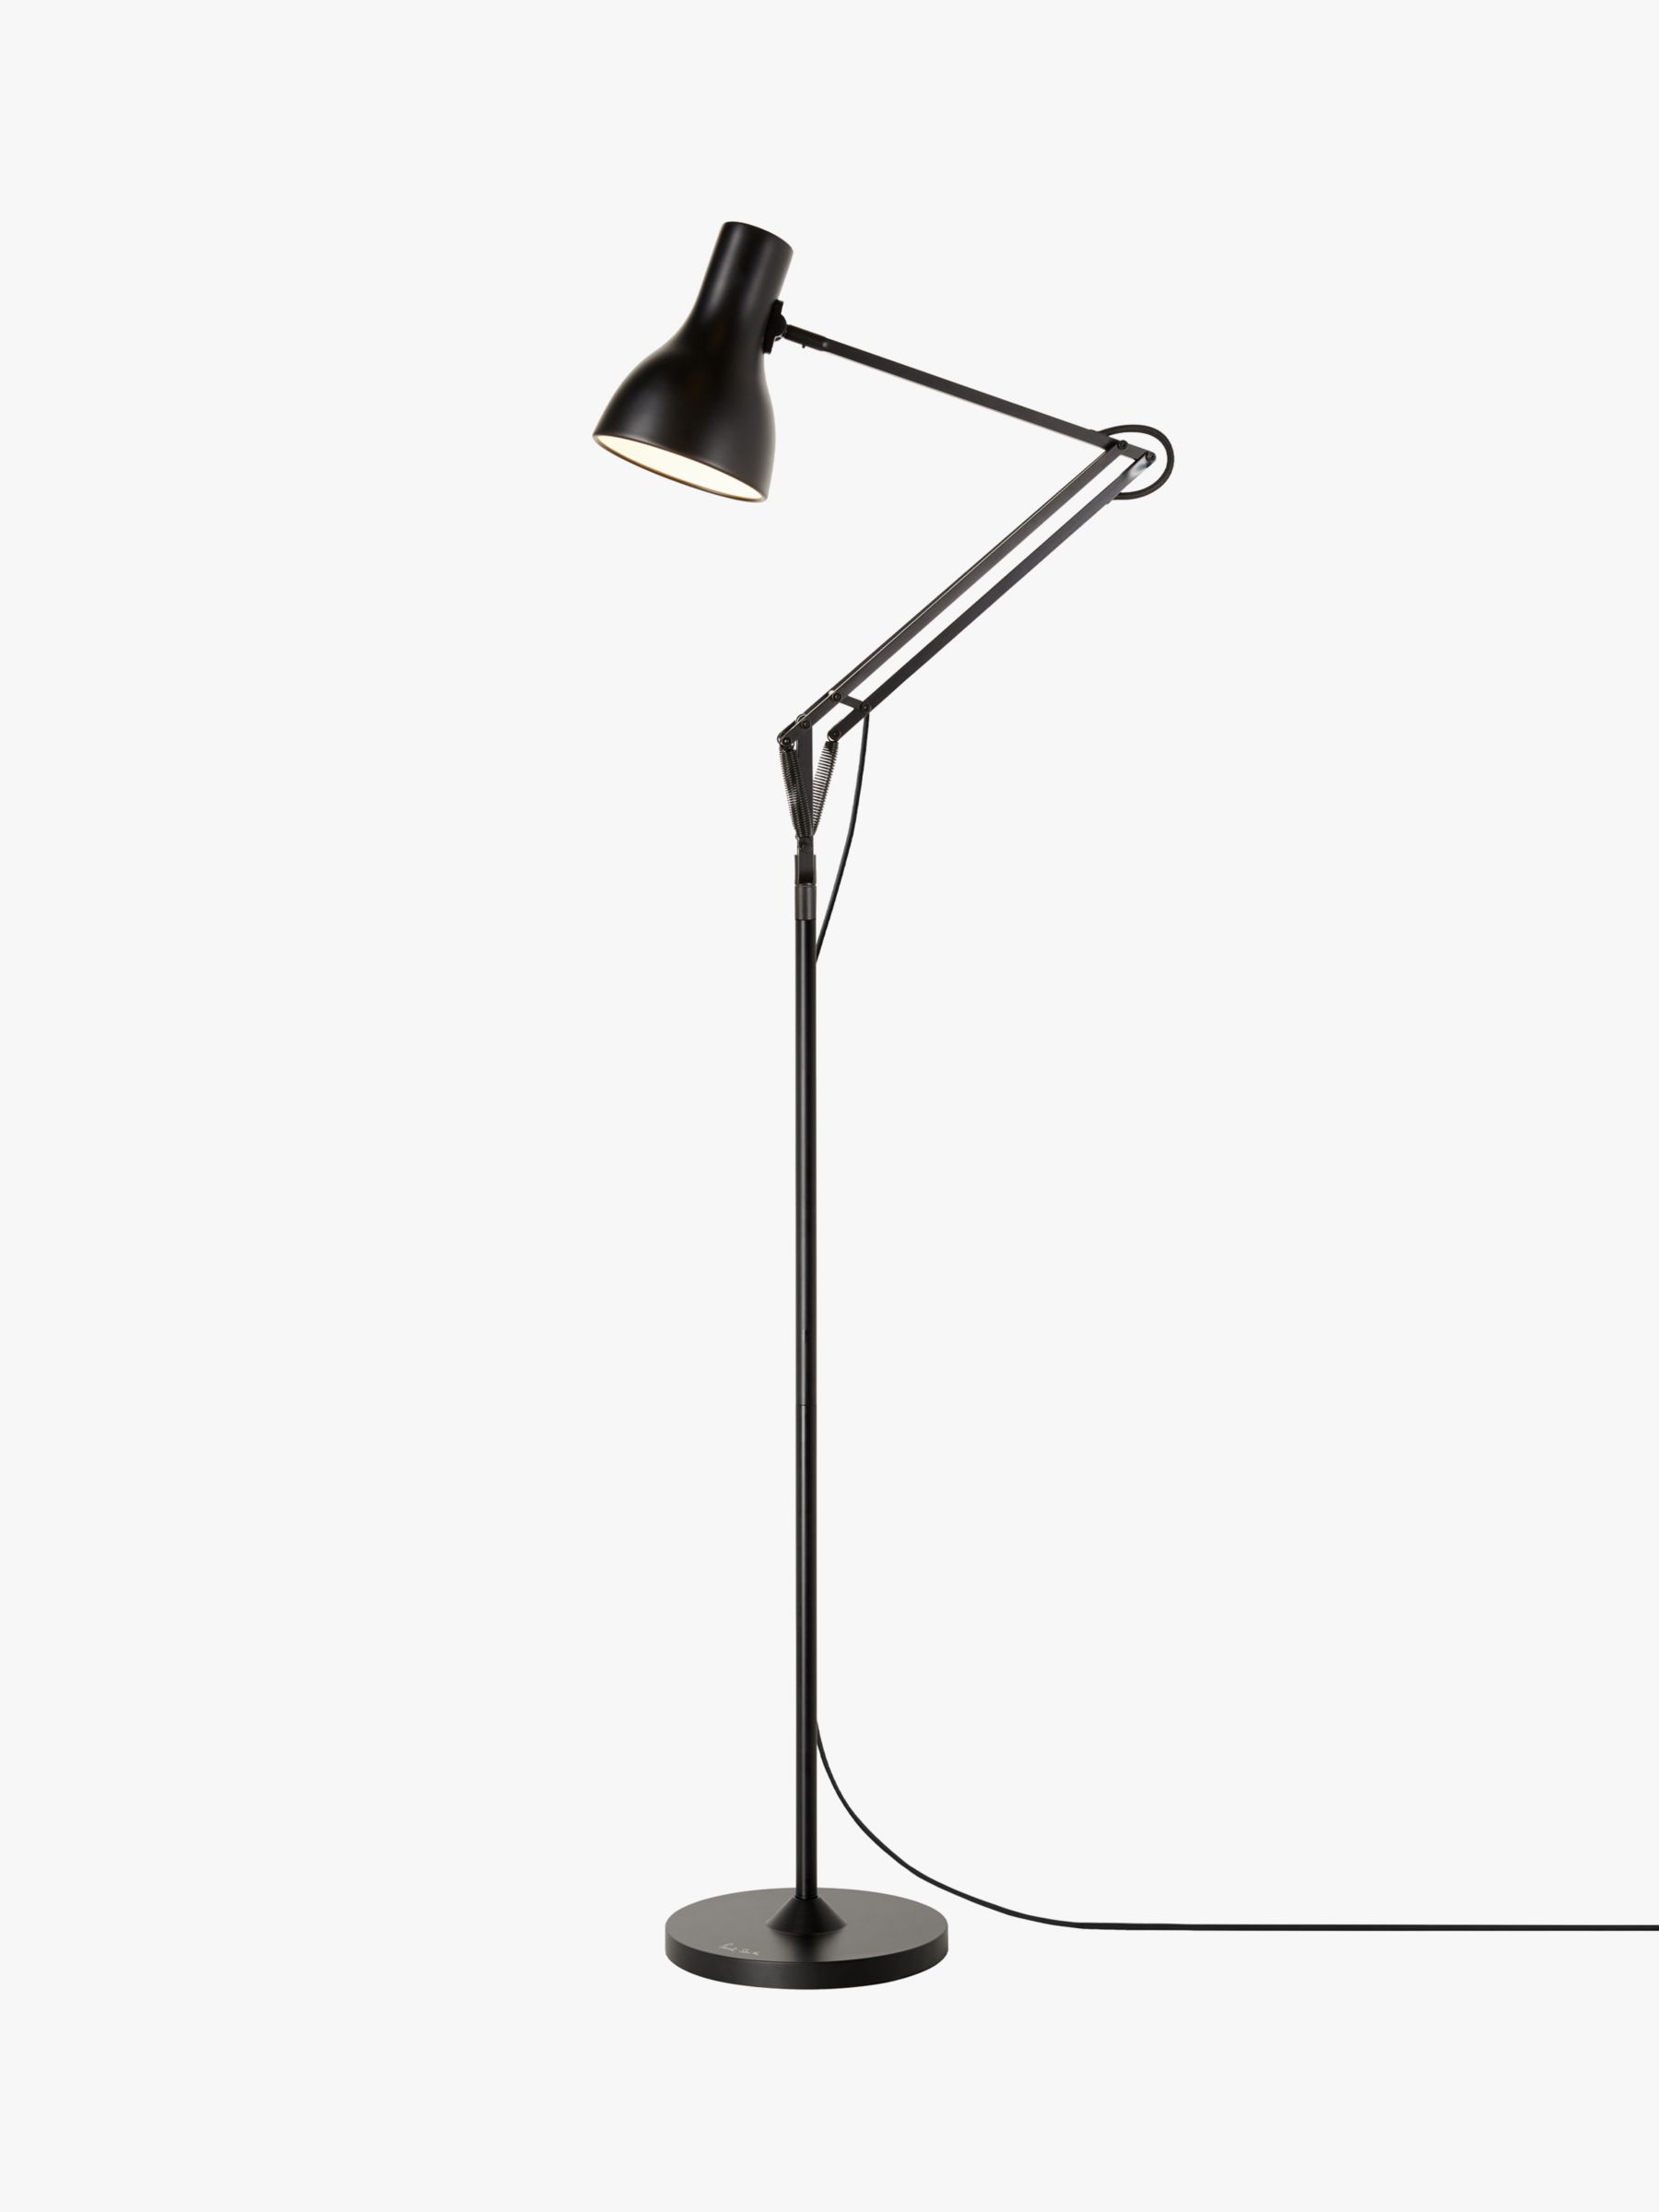 Photo of Anglepoise + paul smith type 75 floor lamp edition 5